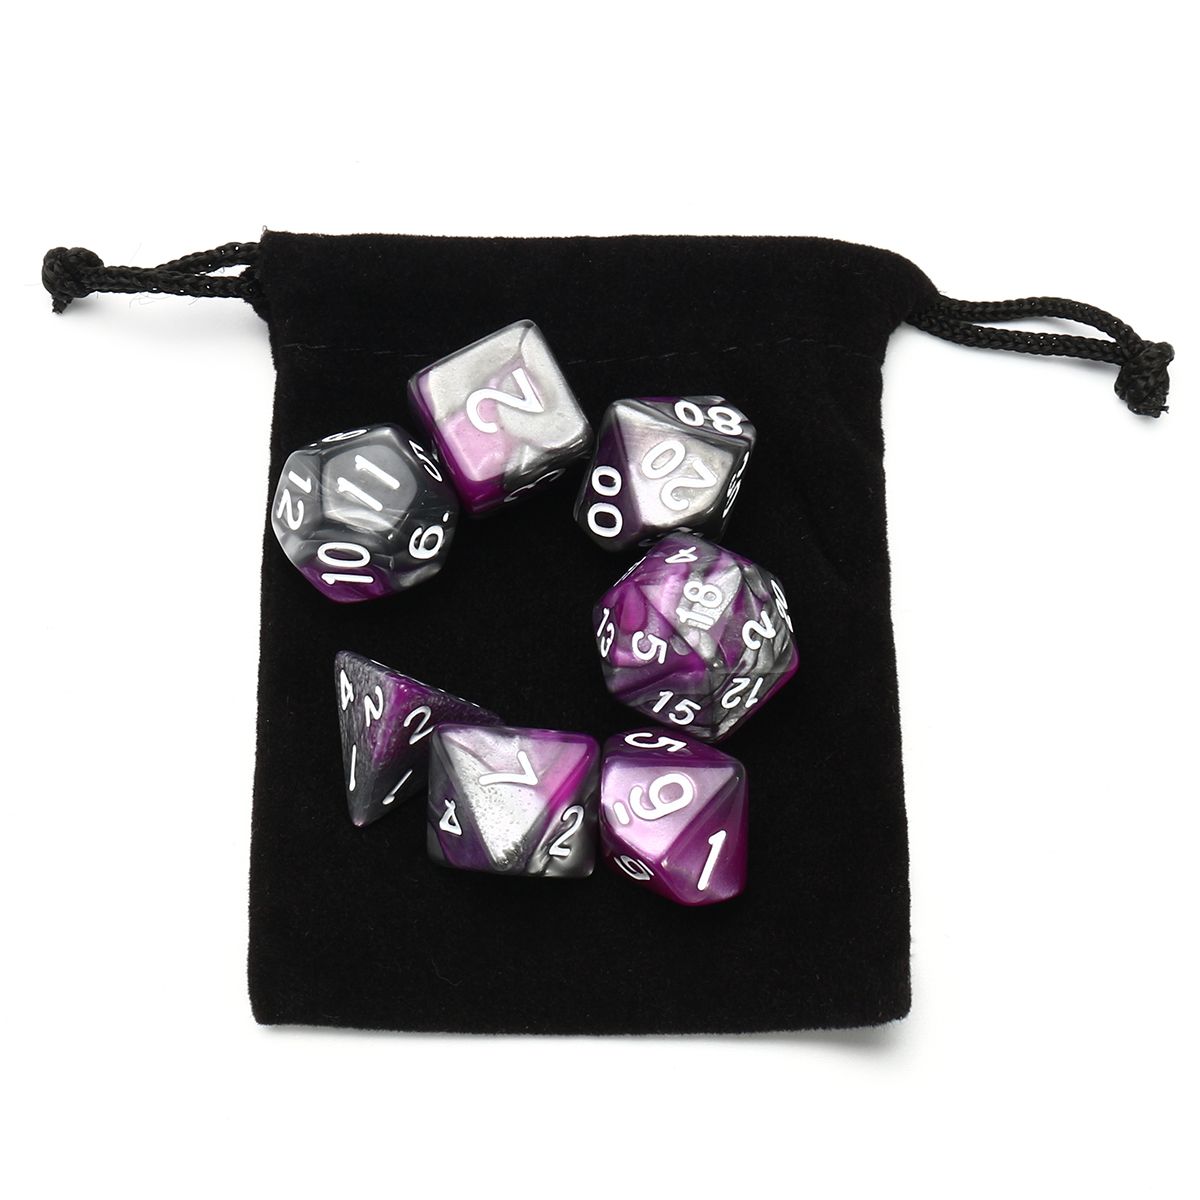 7Pcs-Purple-Gemini-Acrylic-Polyhedral-Dice-For-Dungeons-Dragons-RPG-RPG-With-Bag-1303425